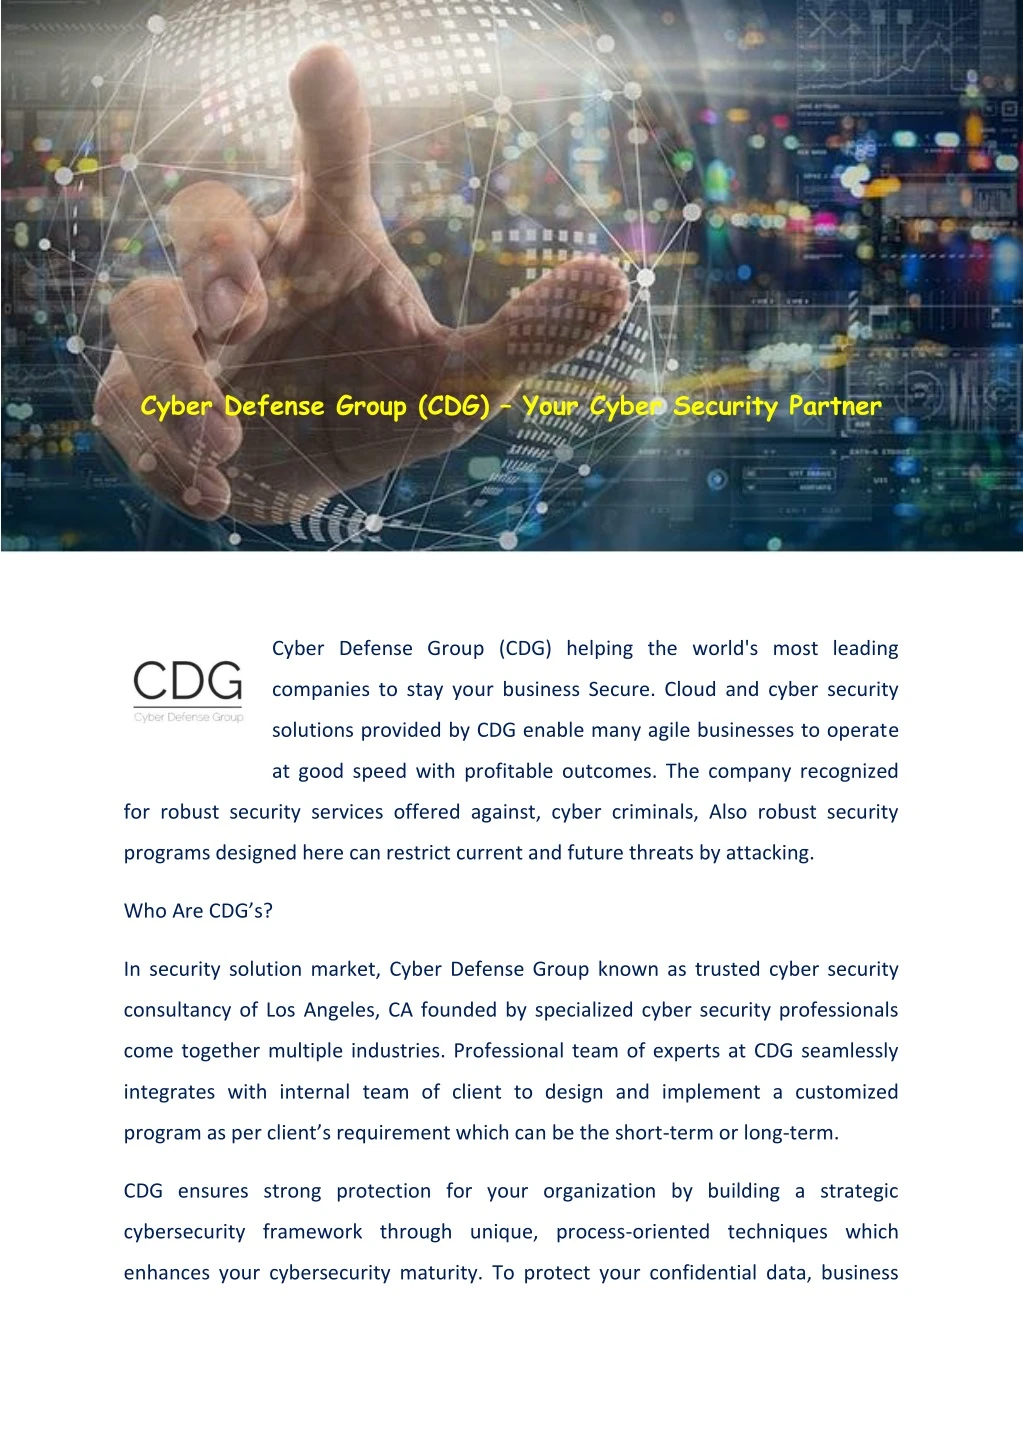 cyber defense group cdg your cyber security